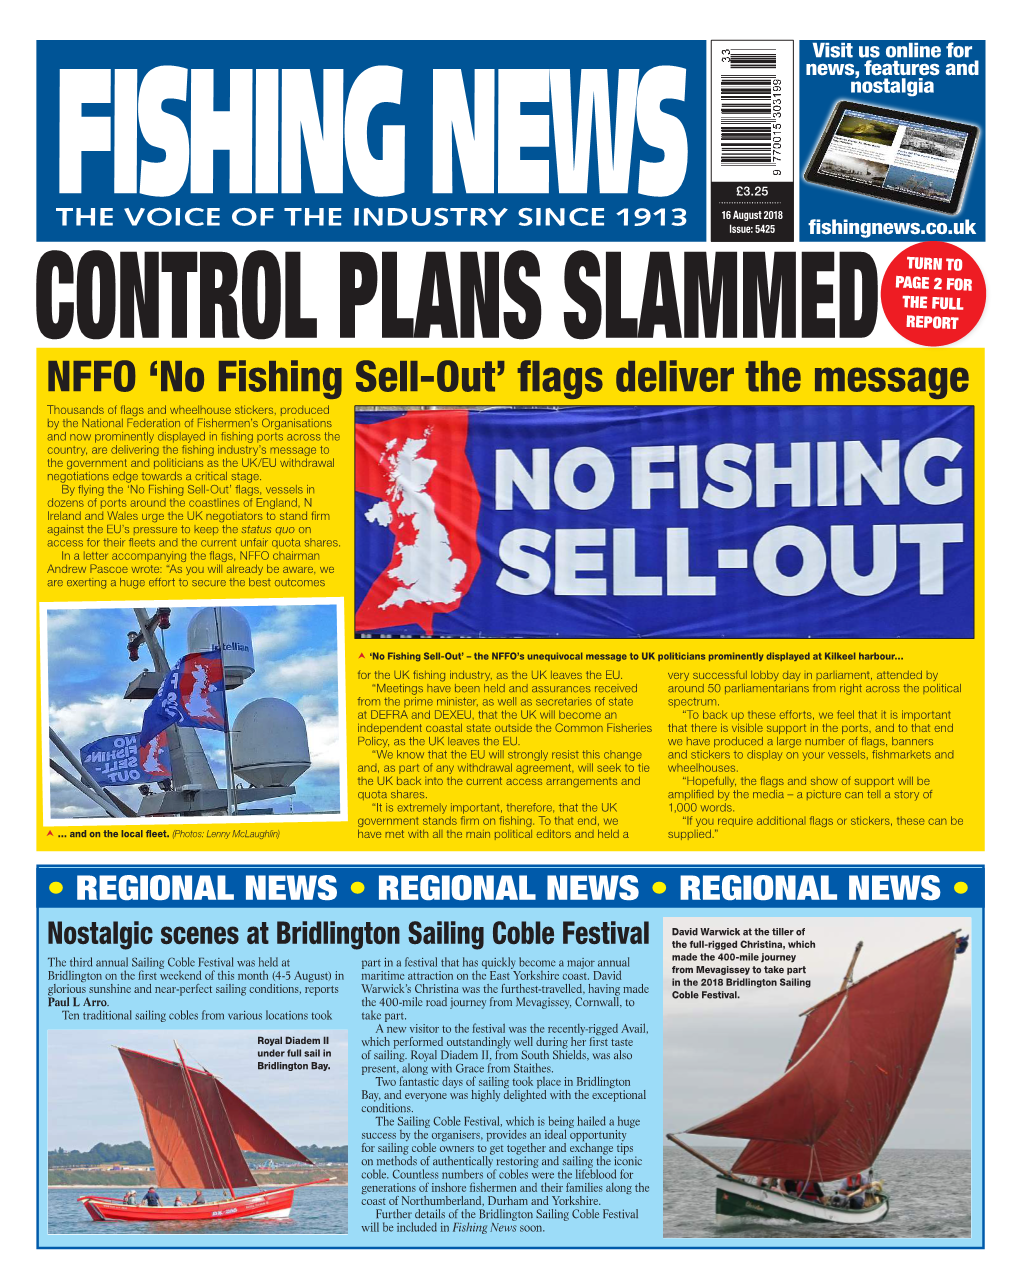 NFFO 'No Fishing Sell-Out' Flags Deliver the Message